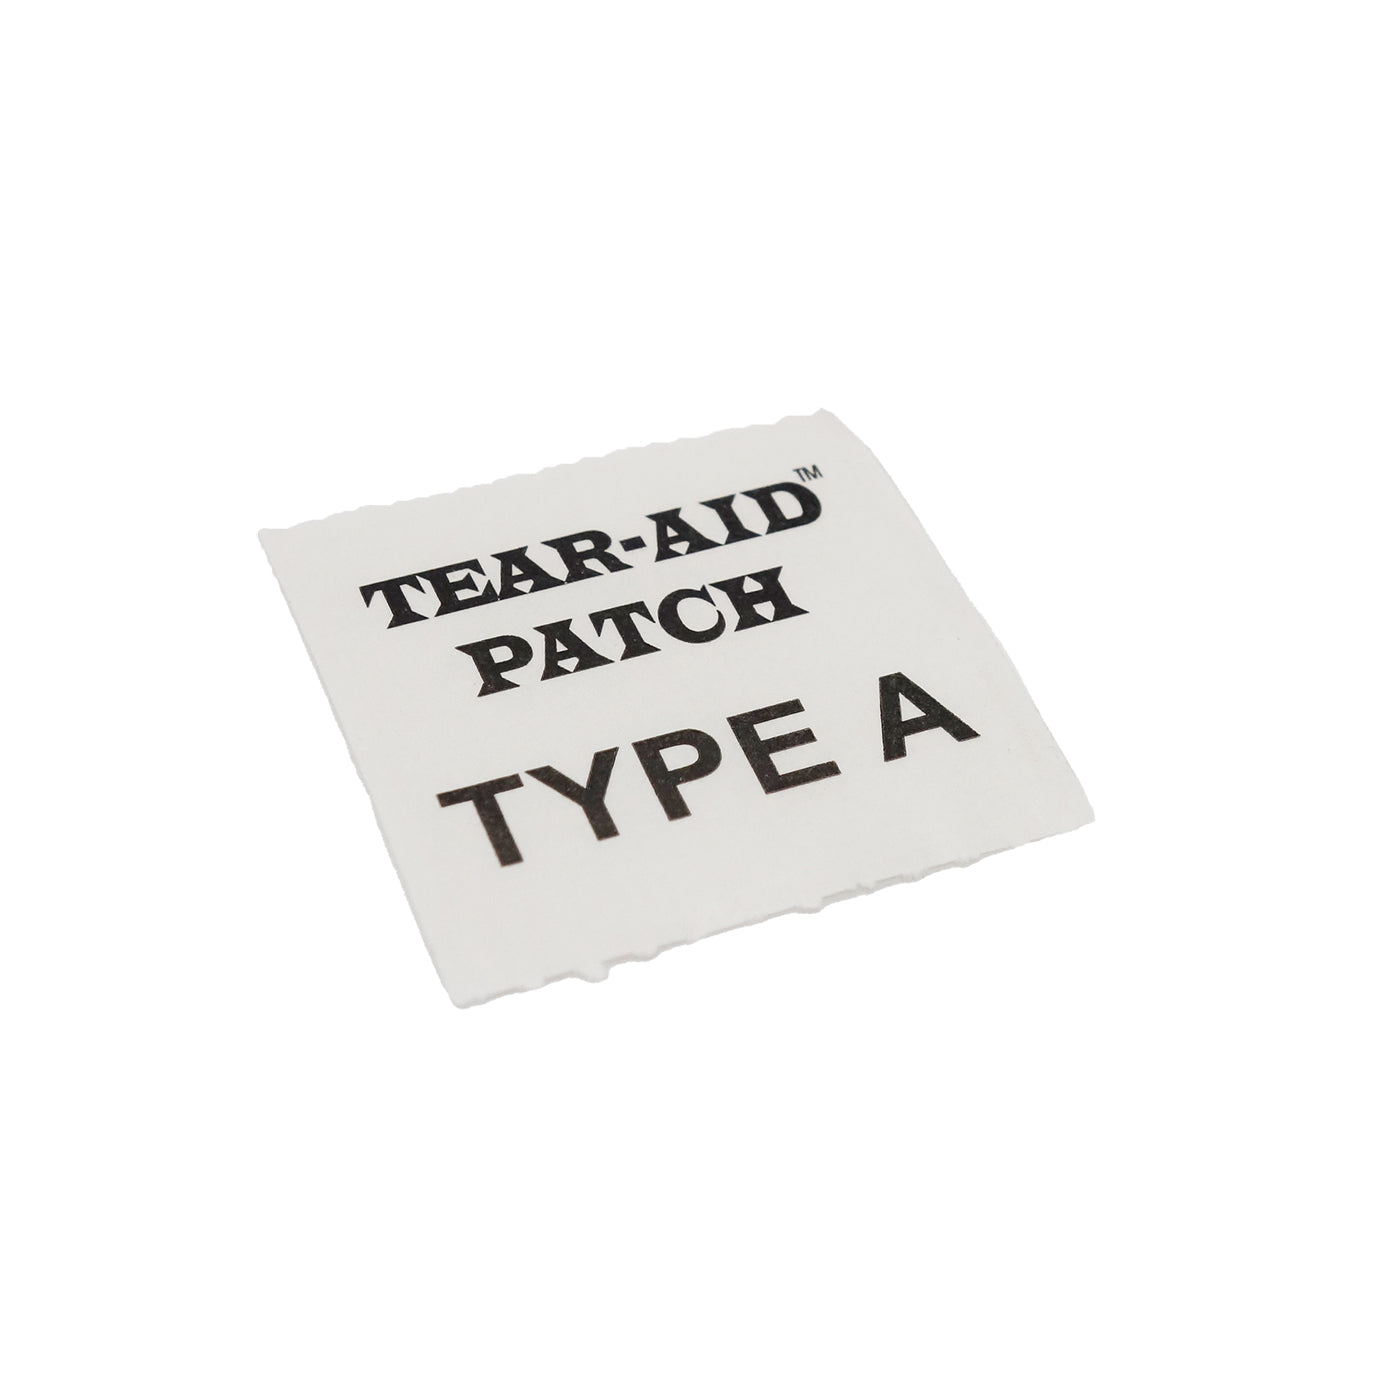 Tear Aid® Patch - Square – Cnoc Outdoors